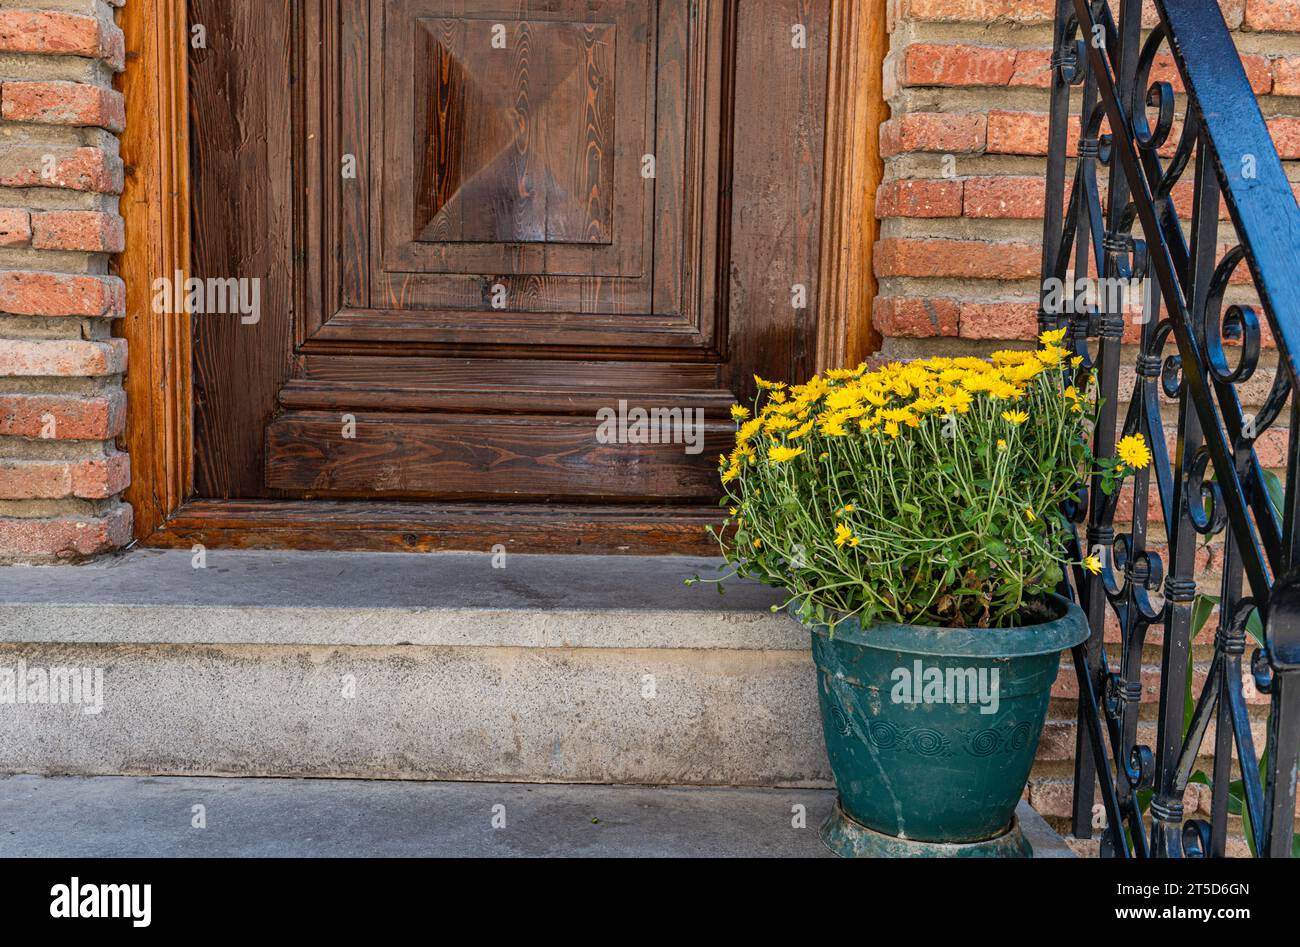 Blooming yellow flowers close to the door on the stairs Stock Photo